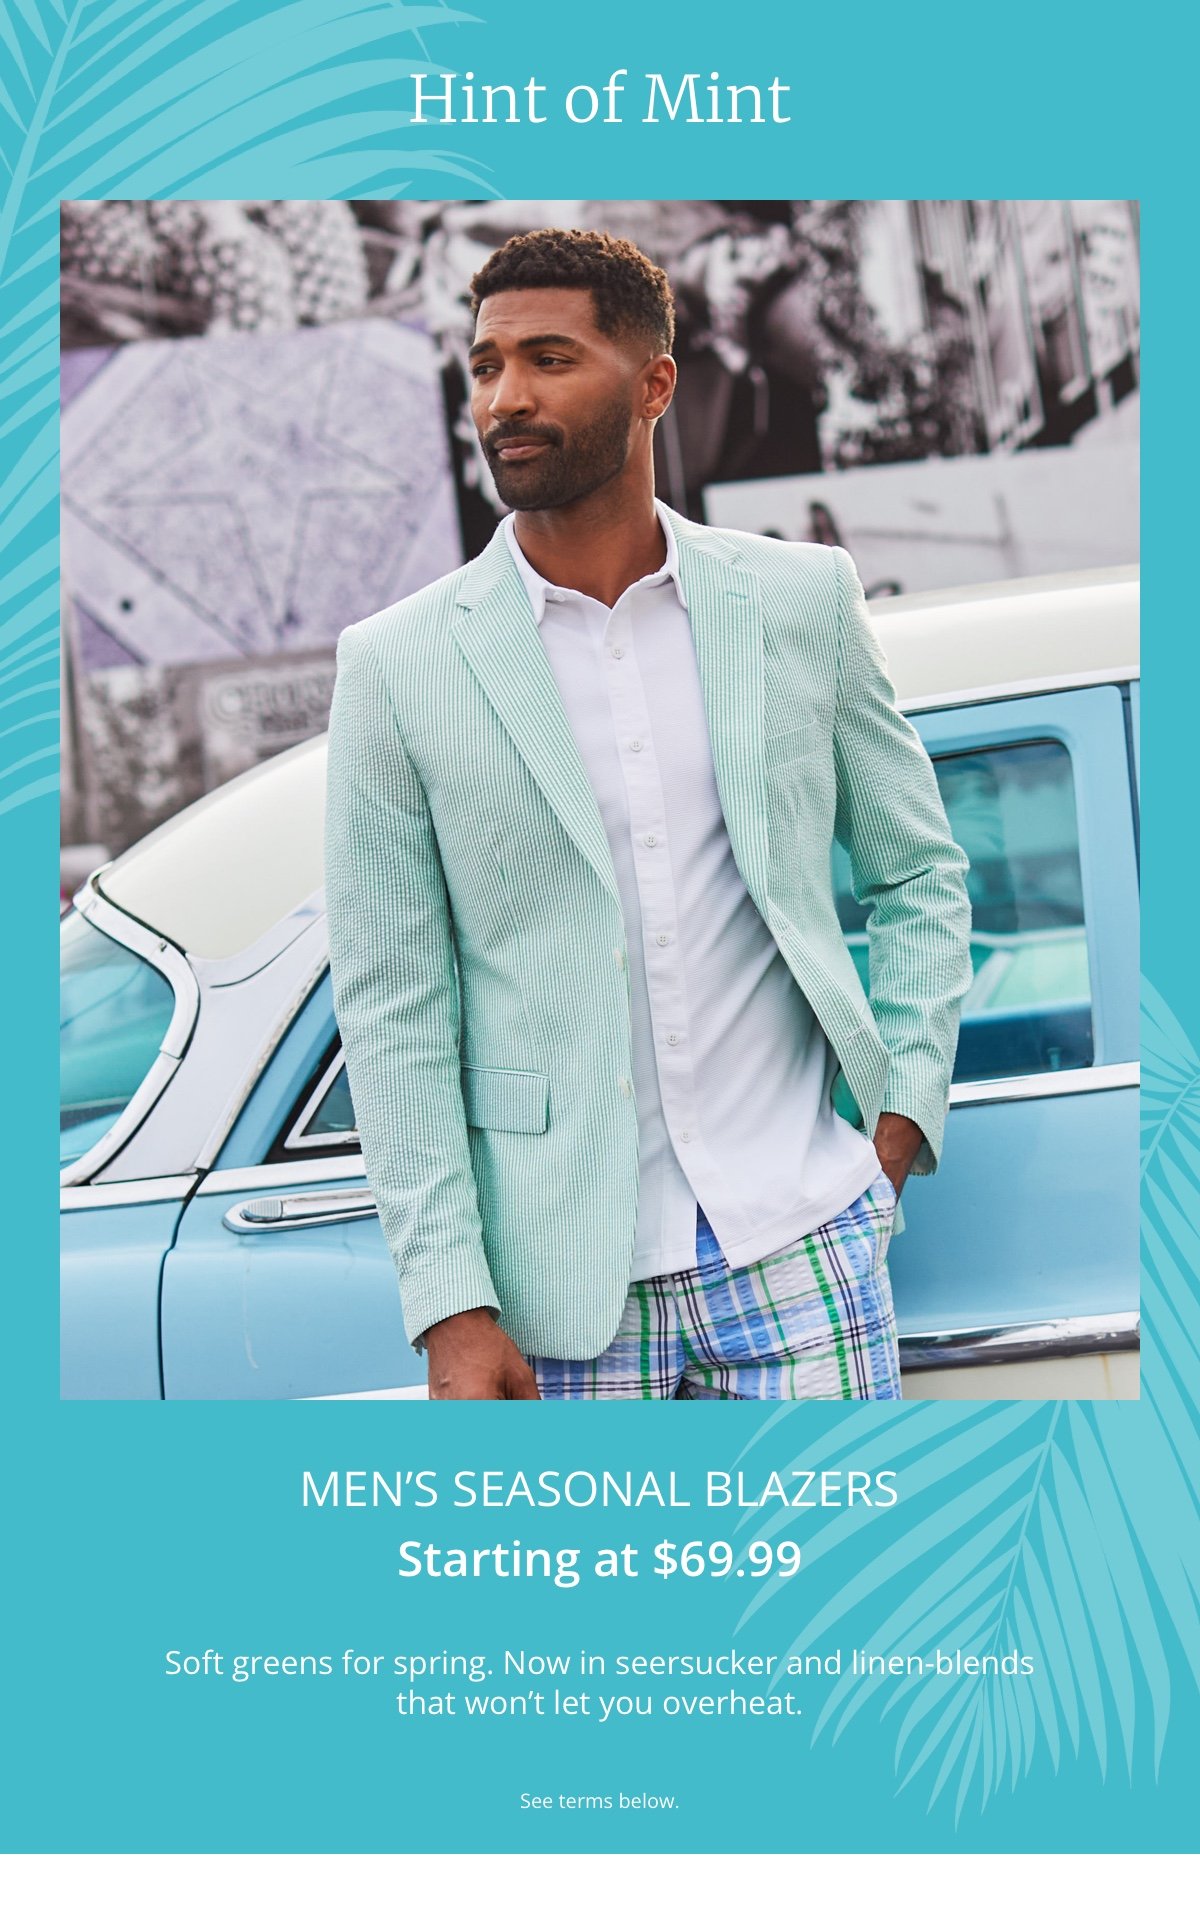 Hint of Mint|Men’s Seasonal Blazers|Starting at \\$69.99|Soft greens for spring. Now in seersucker and linen-blends that won’t let you overheat. Soft greens for spring. Now in seersucker and linen-blends that won’t let you overheat. |See terms below.